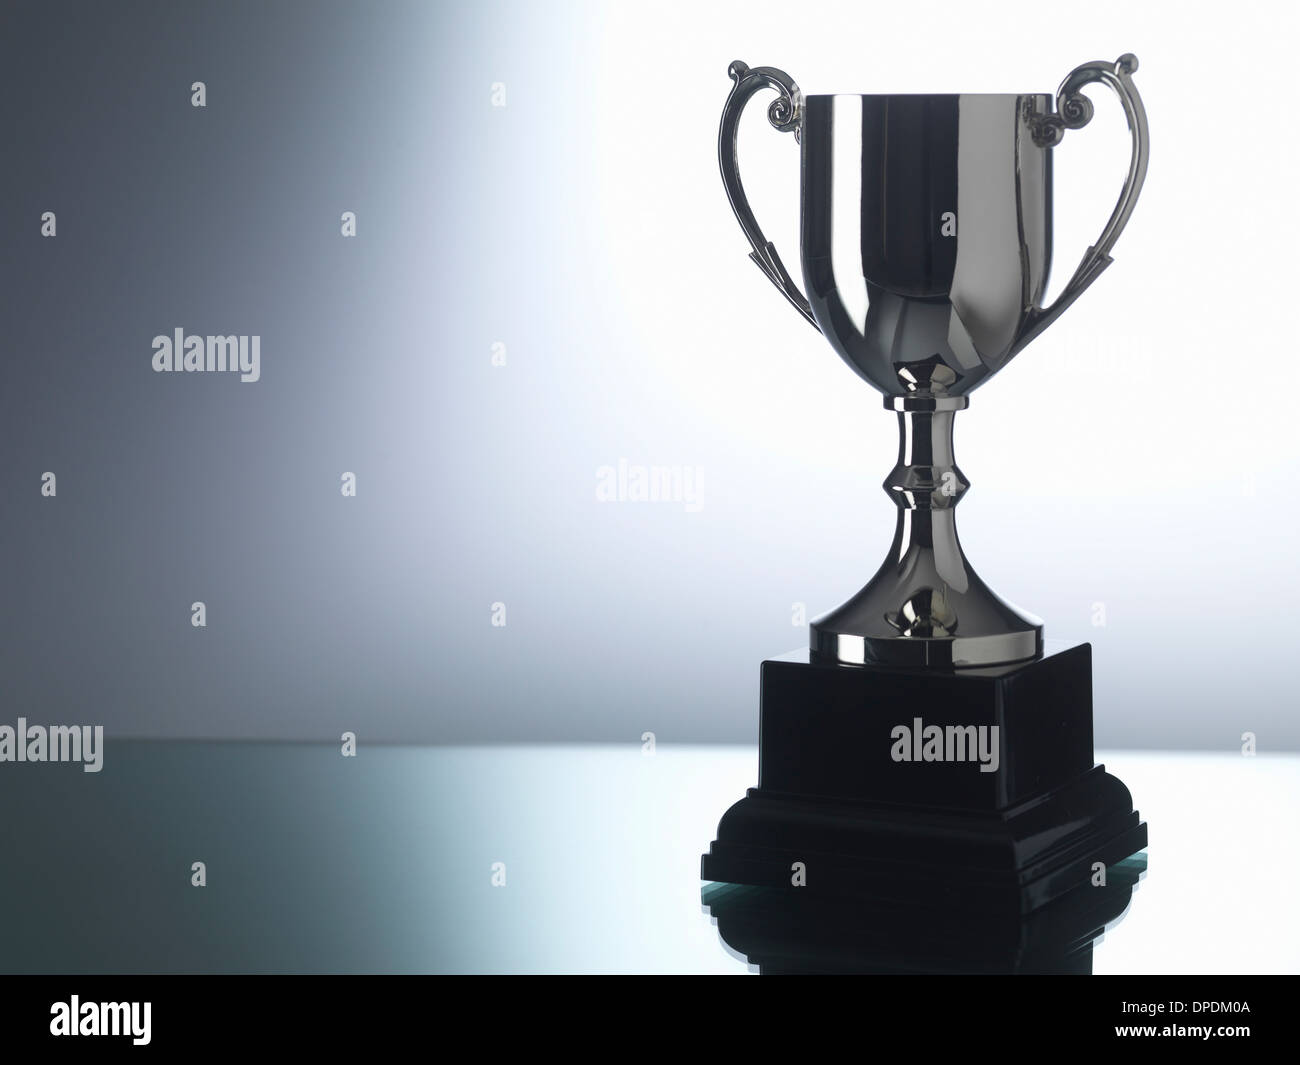 Trophy against black and white background Stock Photo